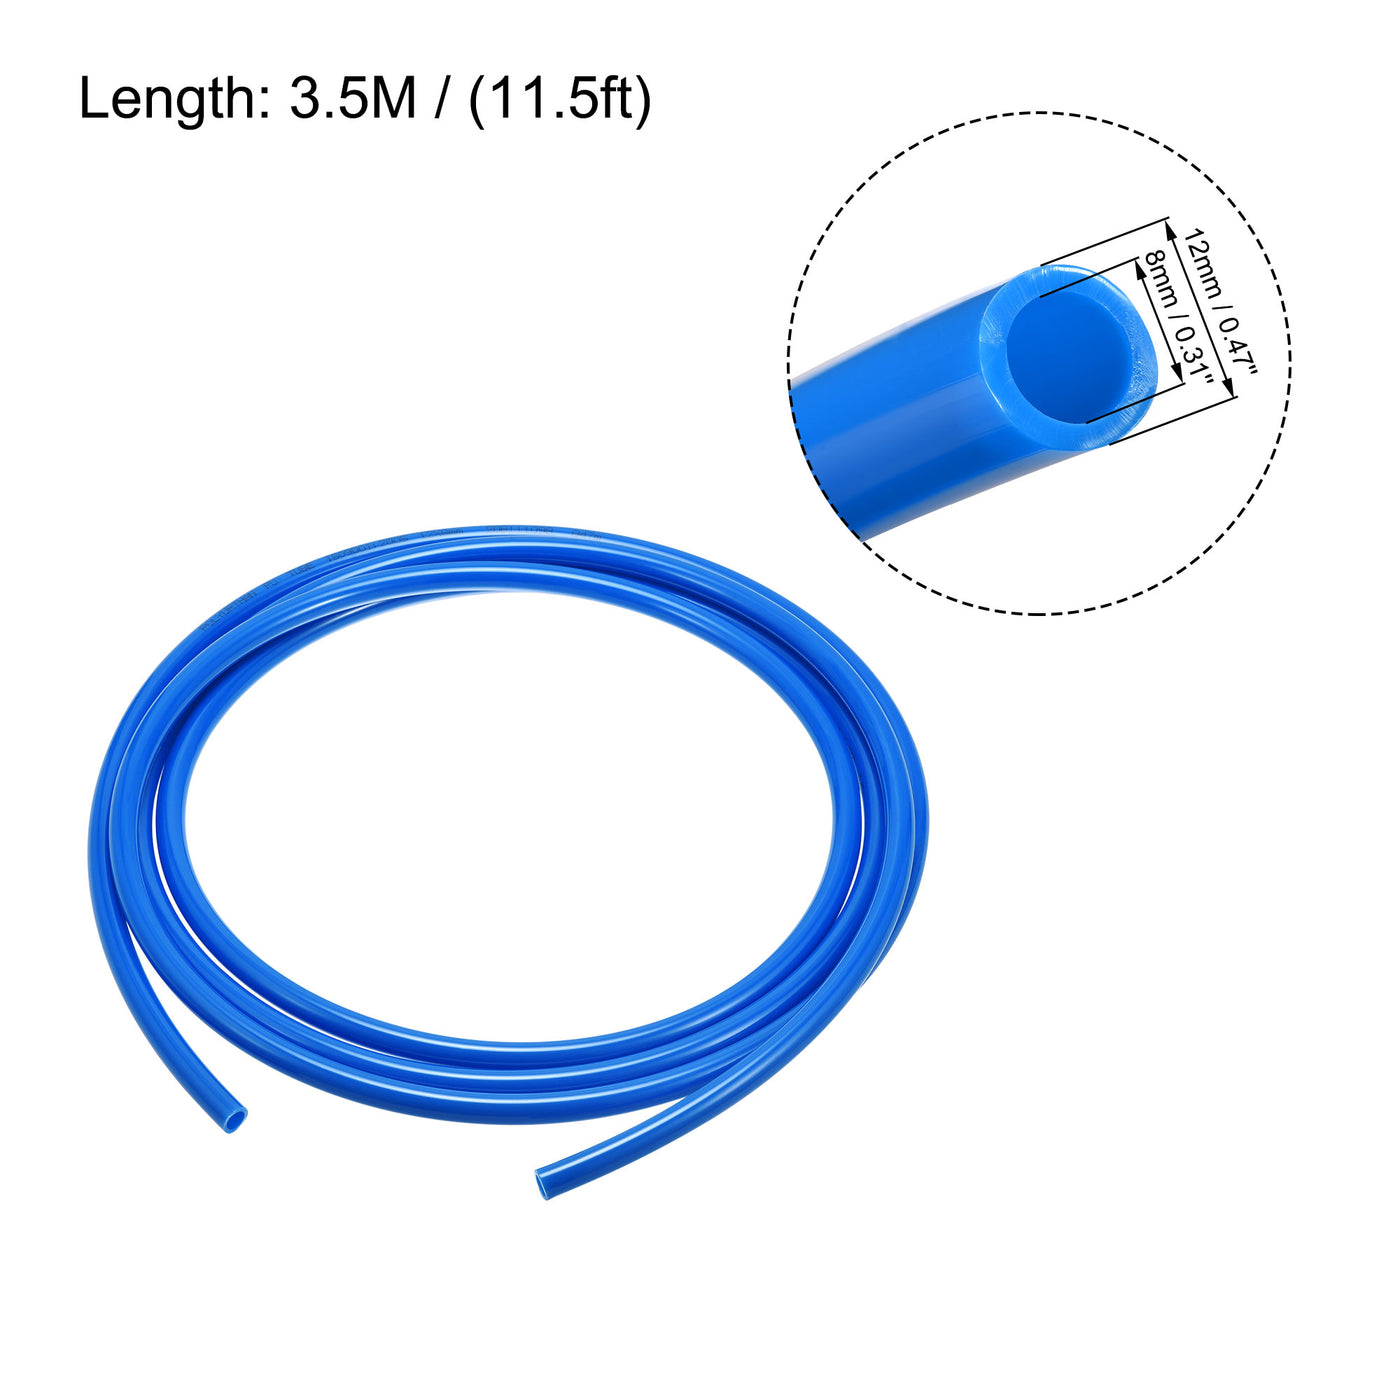 uxcell Uxcell Pneumatic Air Hose Tubing Air Compressor Tube 8mm/0.31''ID x 12mm/0.47''OD x 3.5m/11.5Ft Polyurethane Pipe Blue